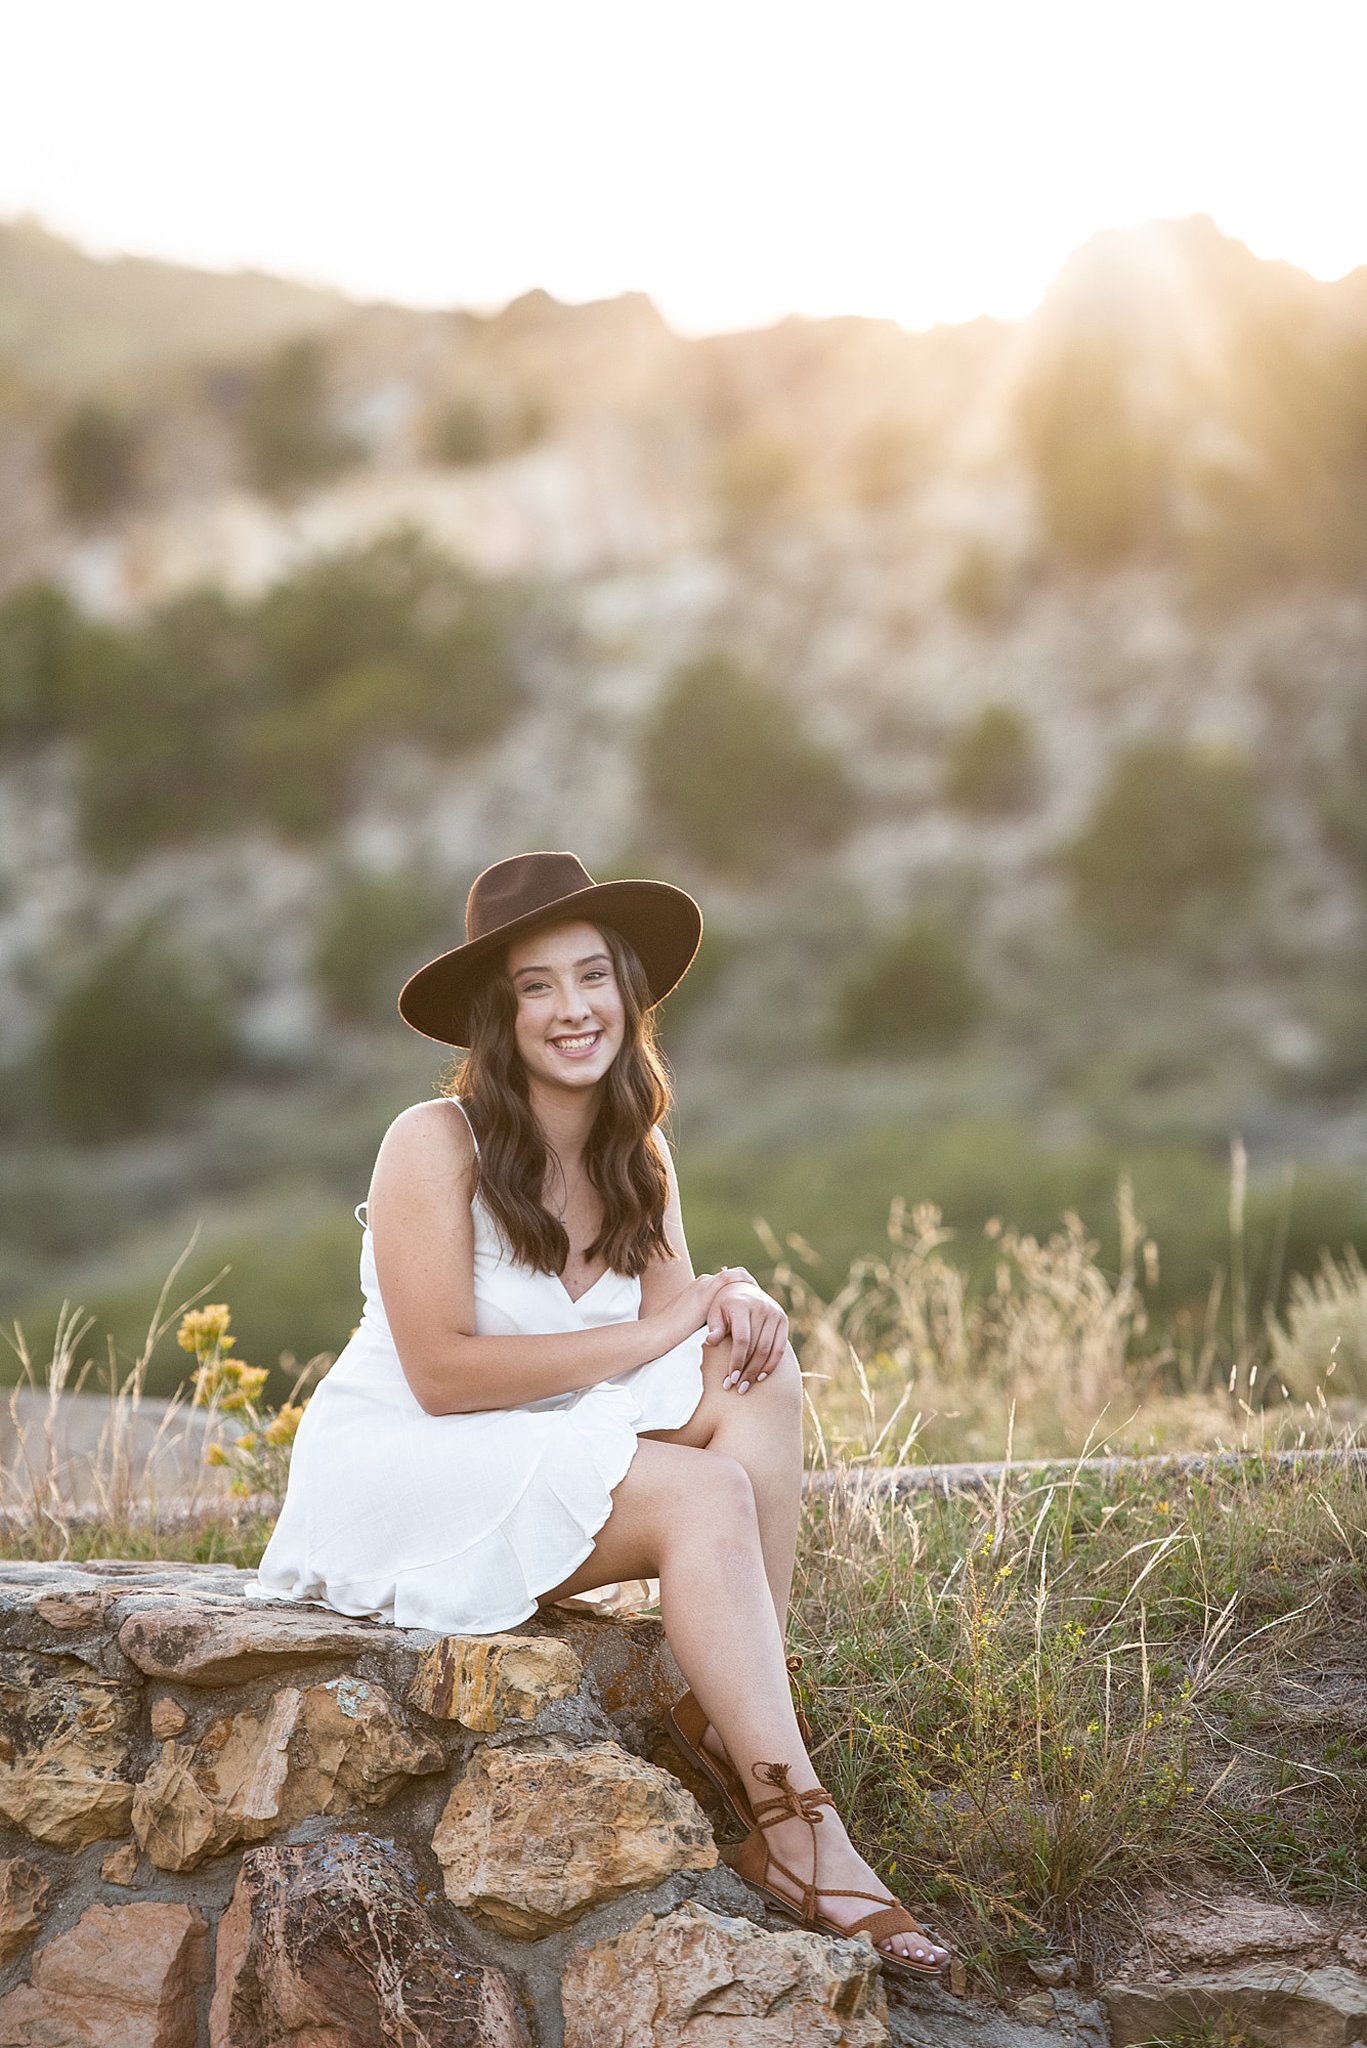 A high school senior in a white dress and brown hat sits on a stone wall in a park at sunset after getting some tutoring colorado springs